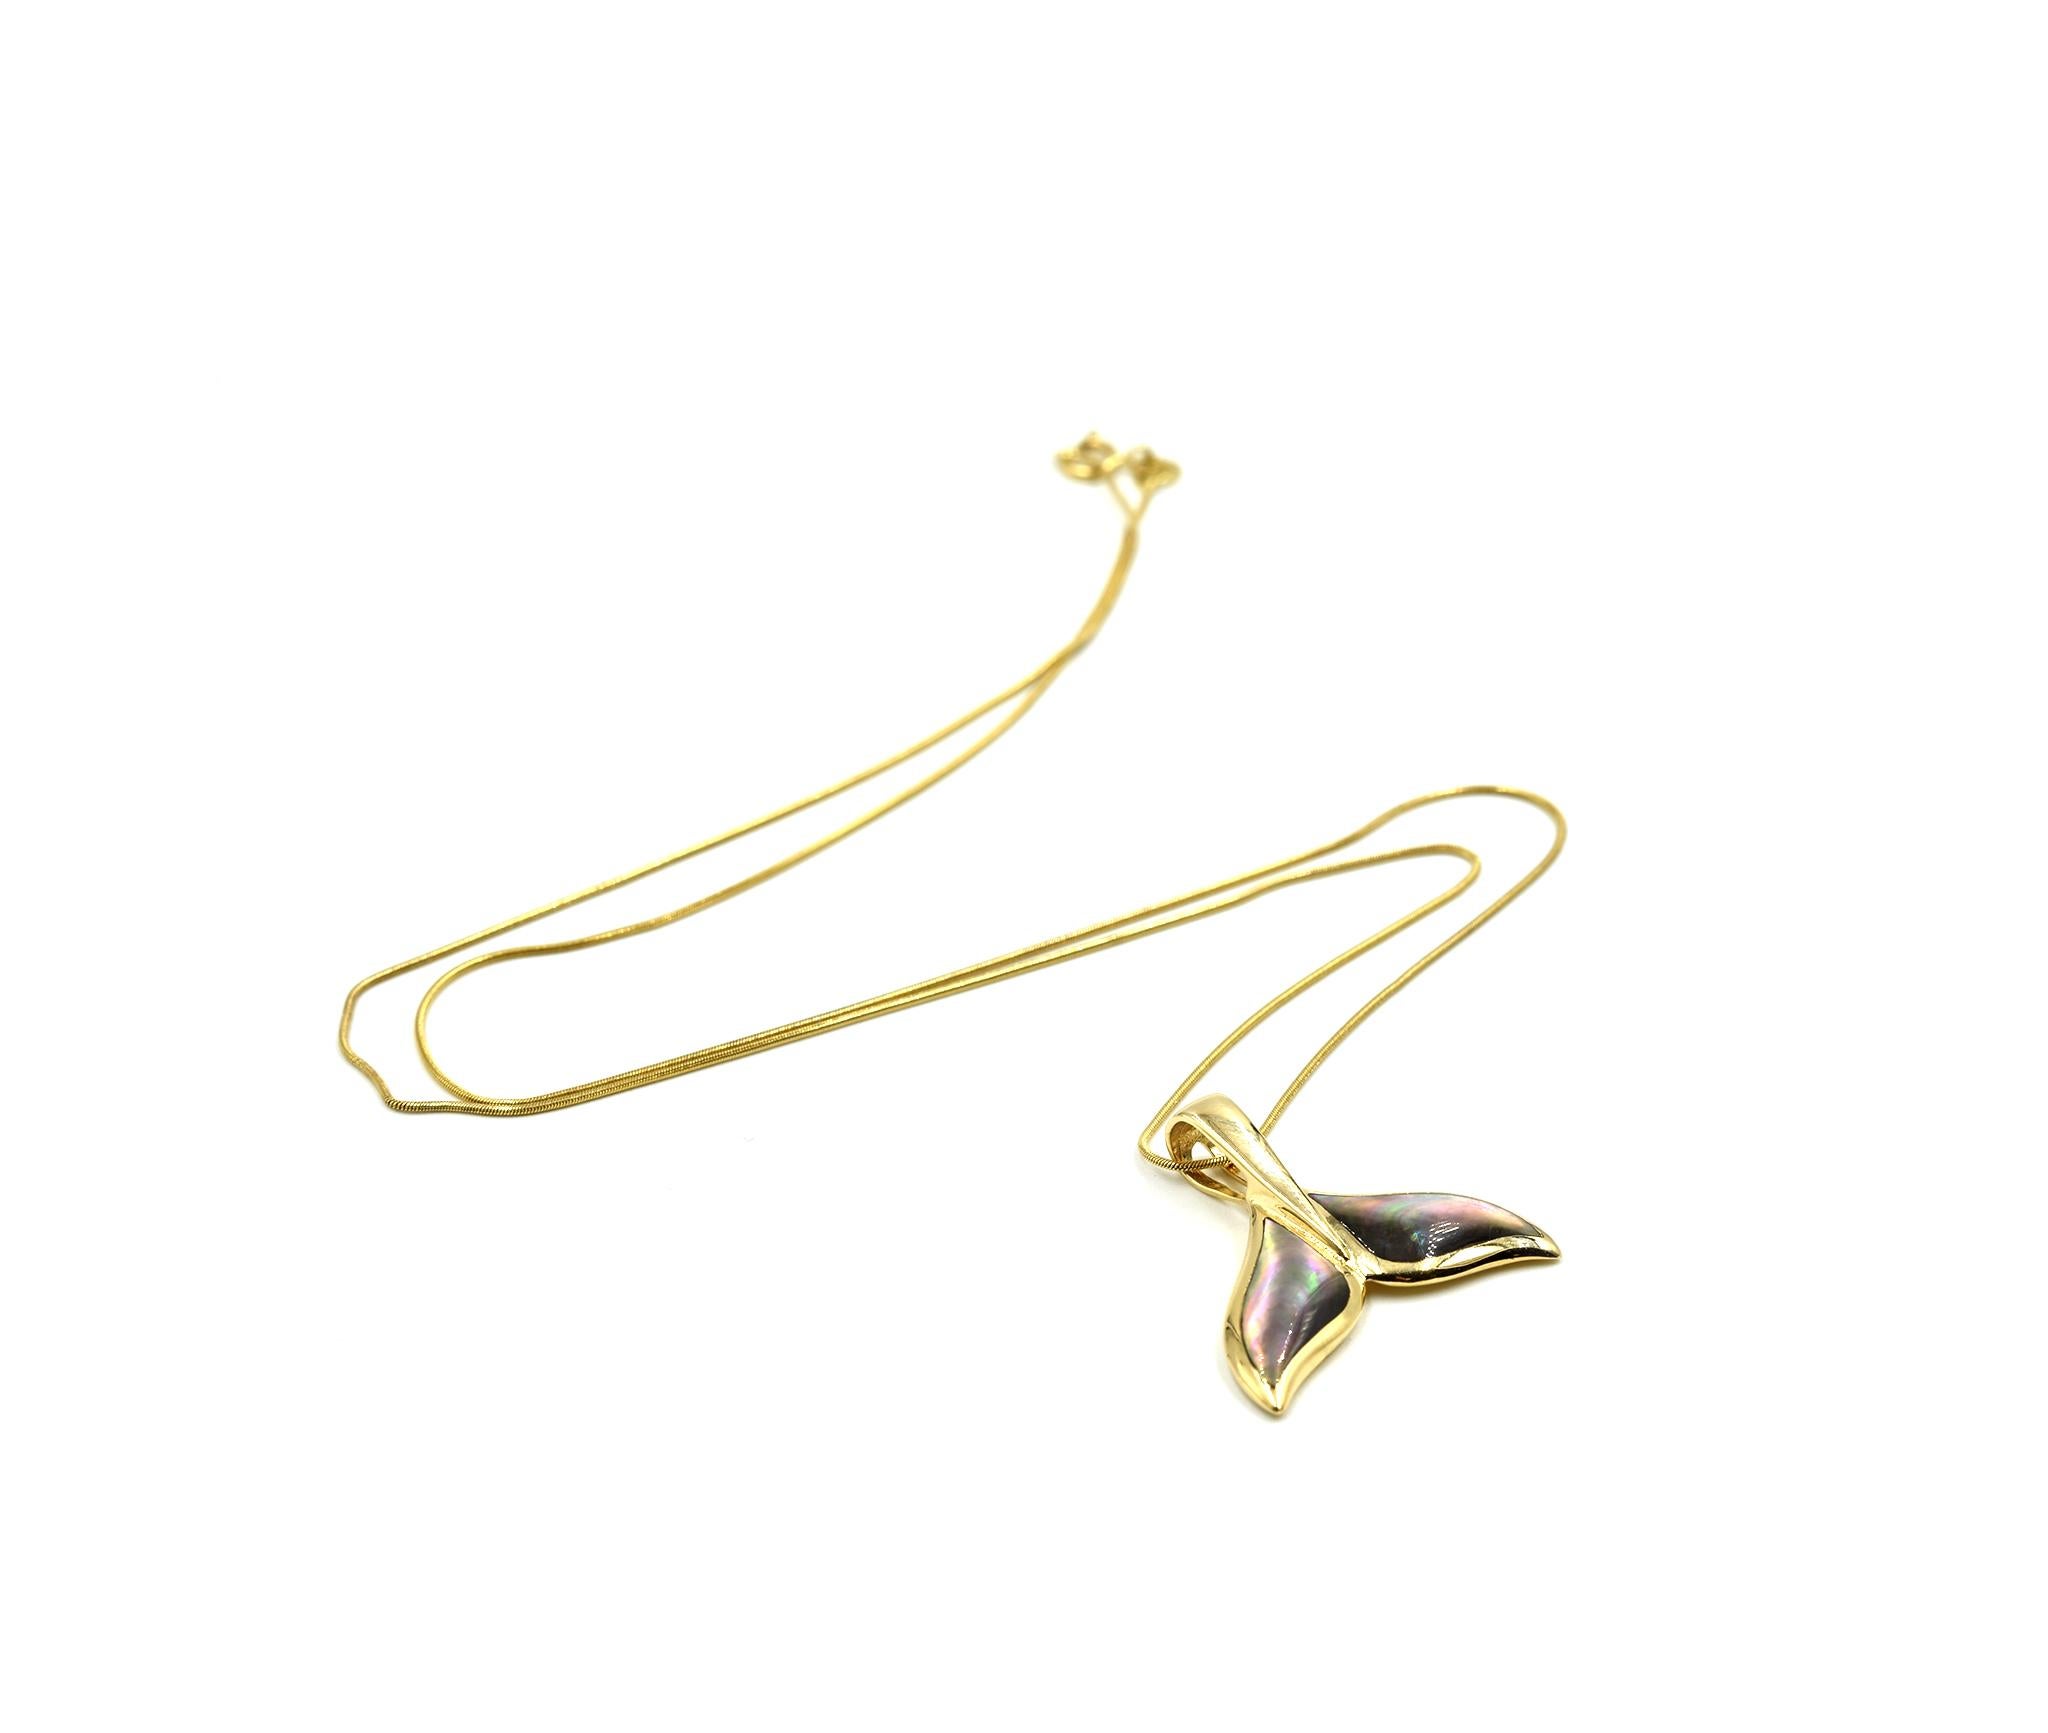 Designer: Robert Wyland
Material: 14k yellow gold
Dimensions: whale tail pendant is 3/4-inch long and 7/8-inch wide, necklace is 19-inches long
Weight: 5.20 grams
Retail: $595.00
